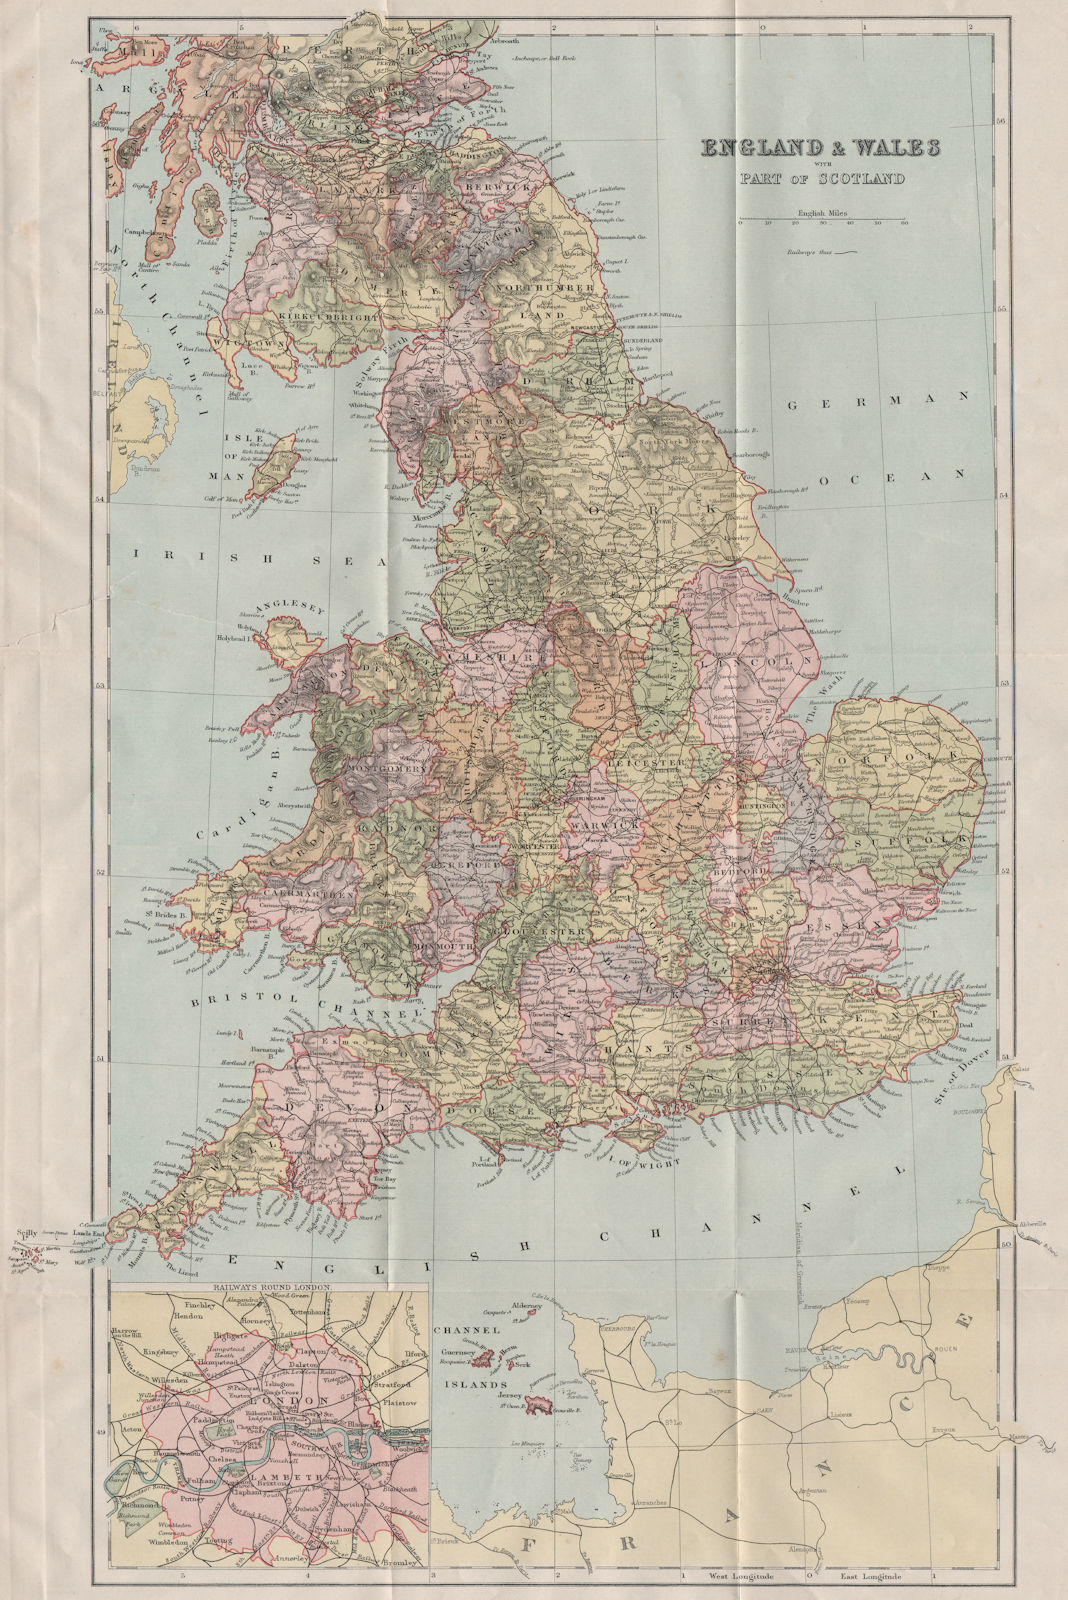 Associate Product ENGLAND & WALES WITH PART OF SCOTLAND. Great Britain 1893 old antique map